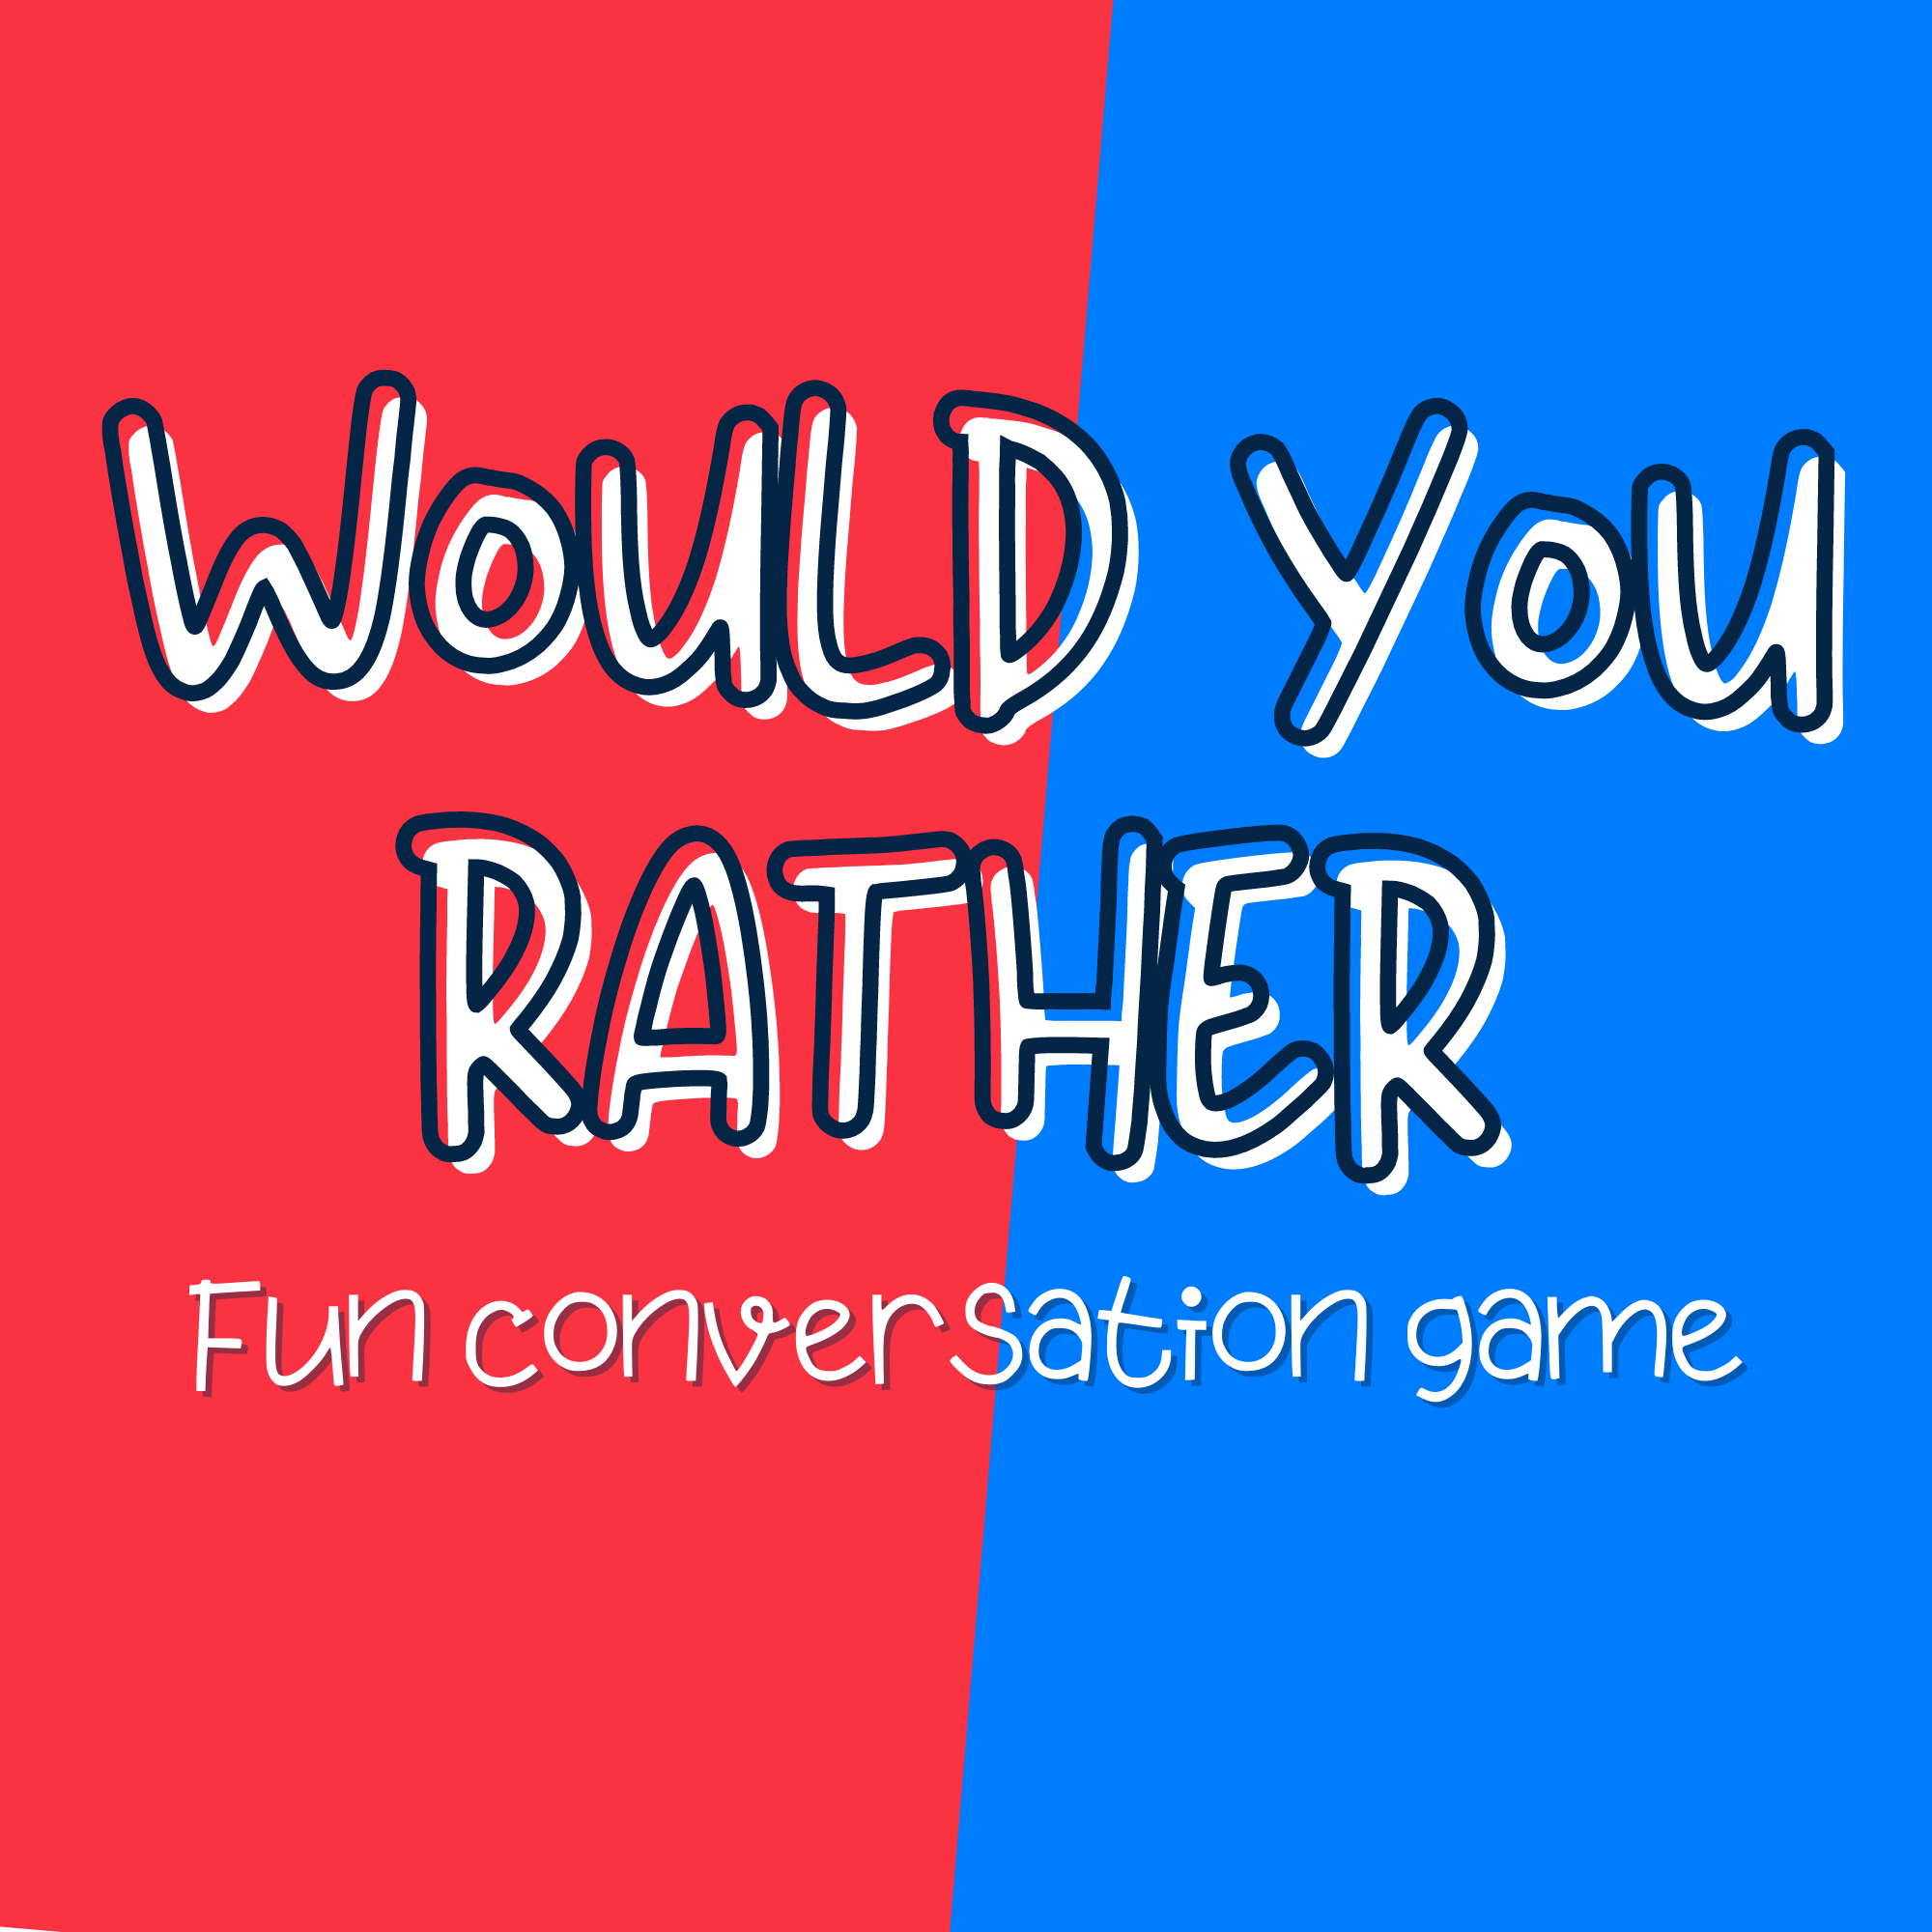 3,001 Would You Rather Questions - Second Edition, Quarto At A Glance